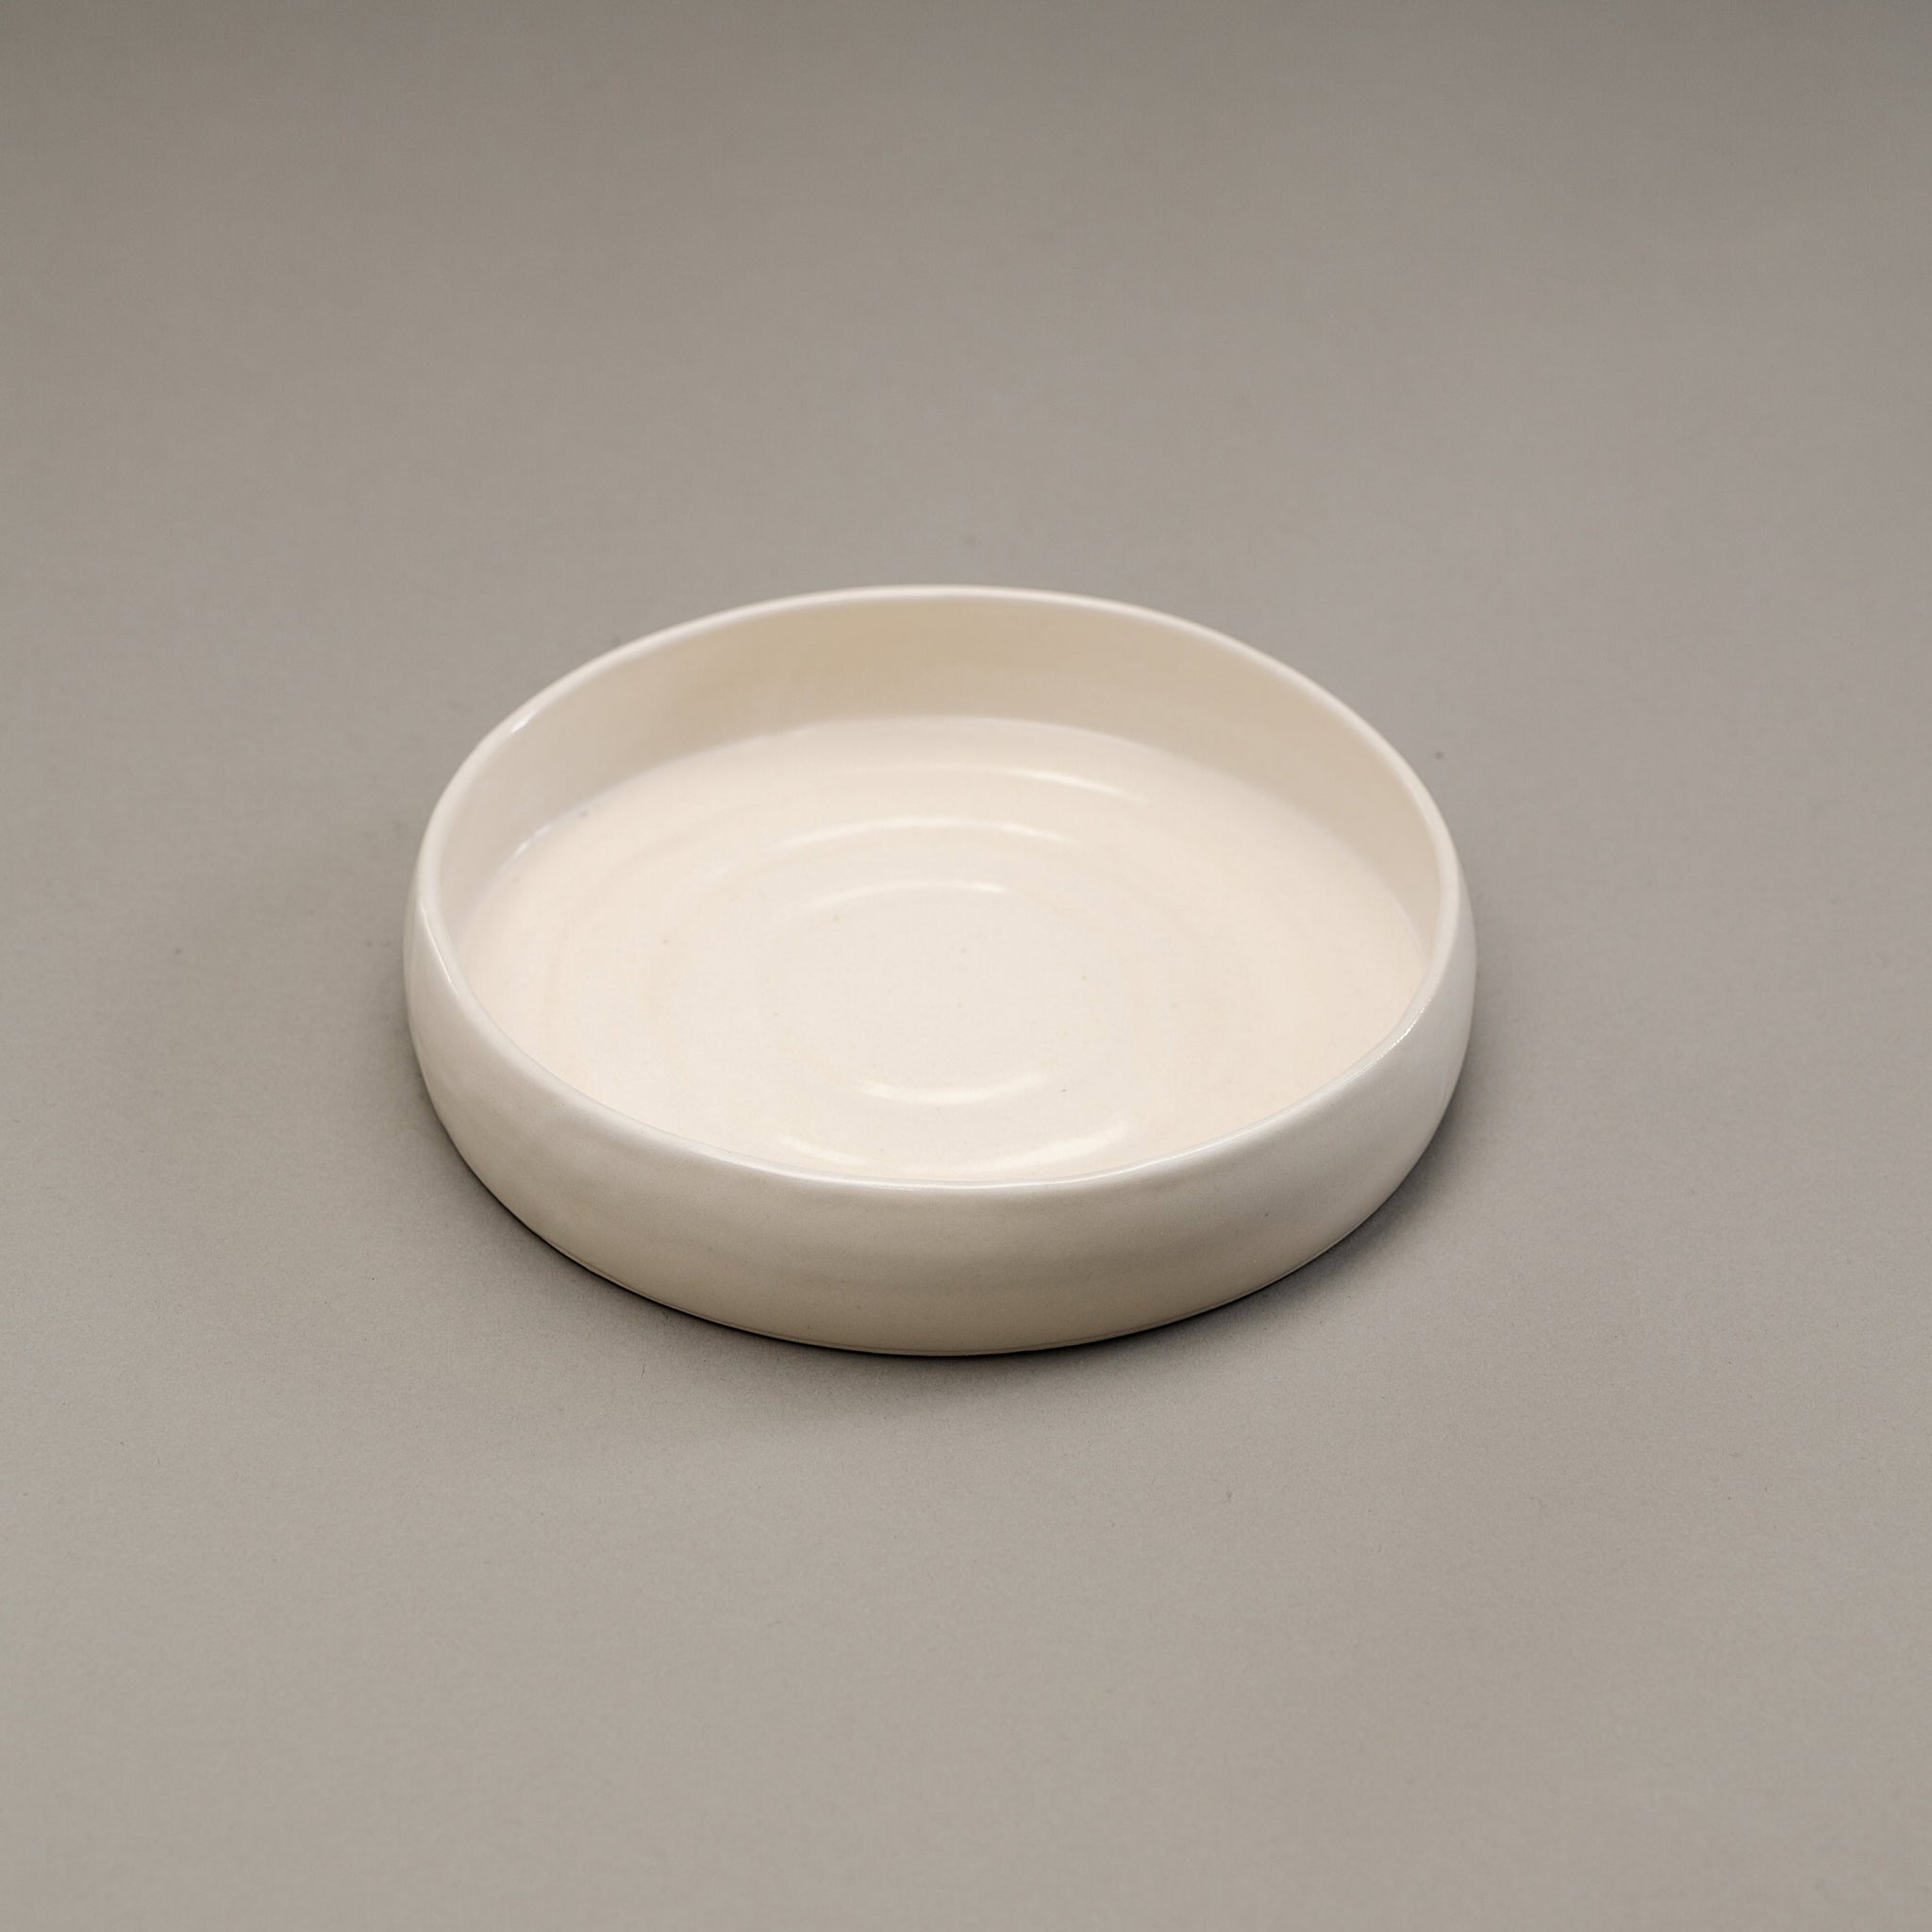 A stoneware salad plate in a white finish.